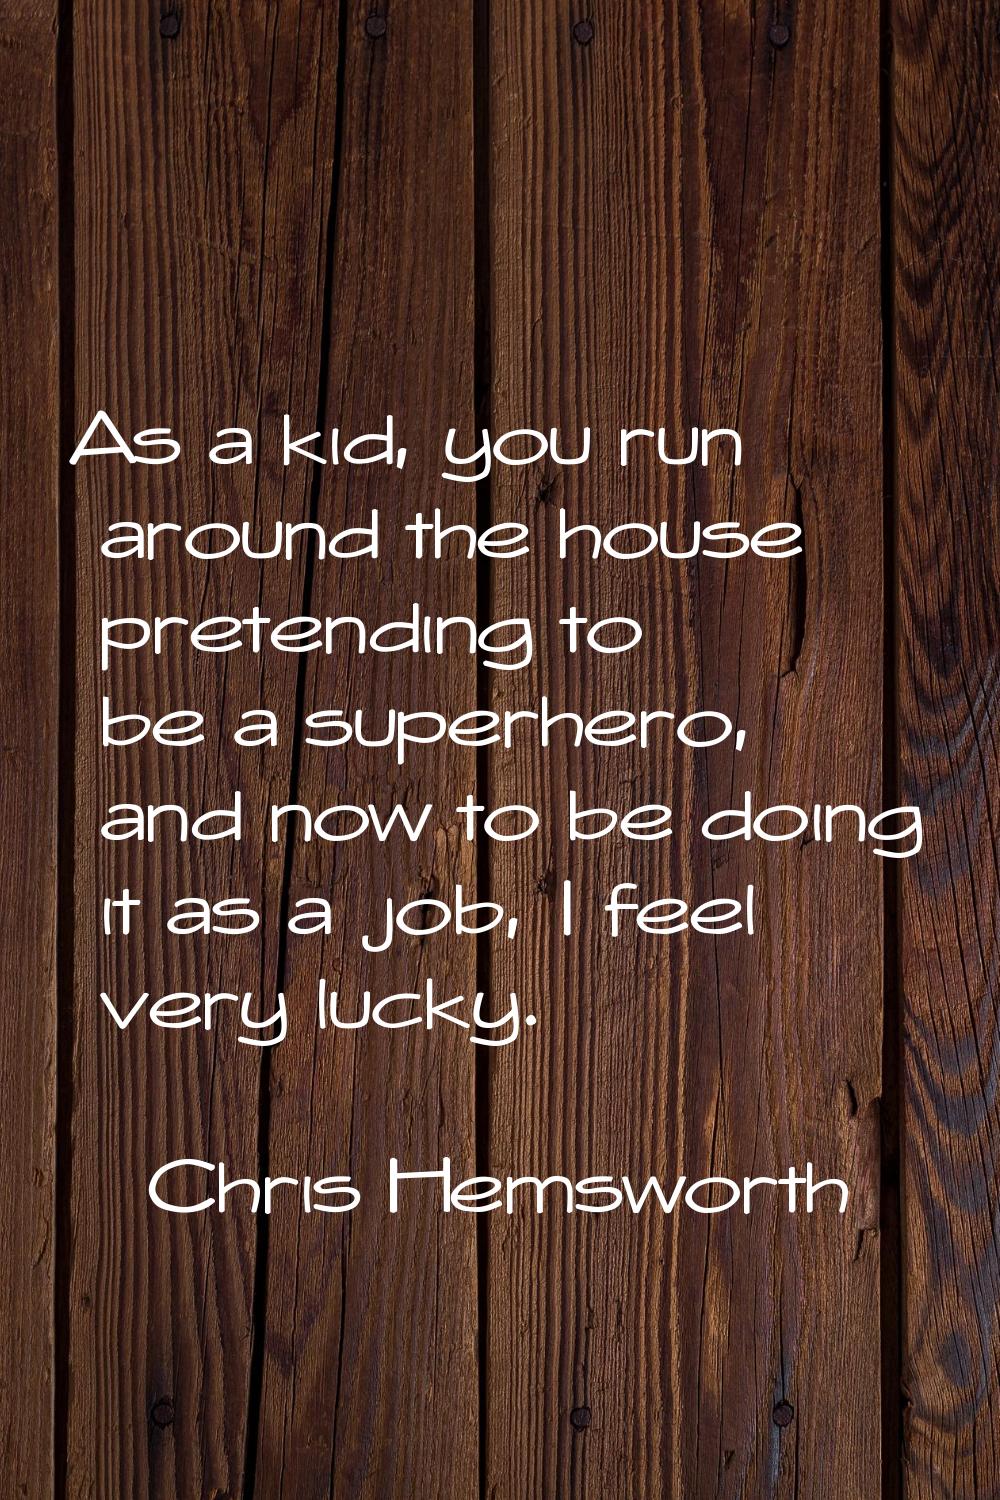 As a kid, you run around the house pretending to be a superhero, and now to be doing it as a job, I